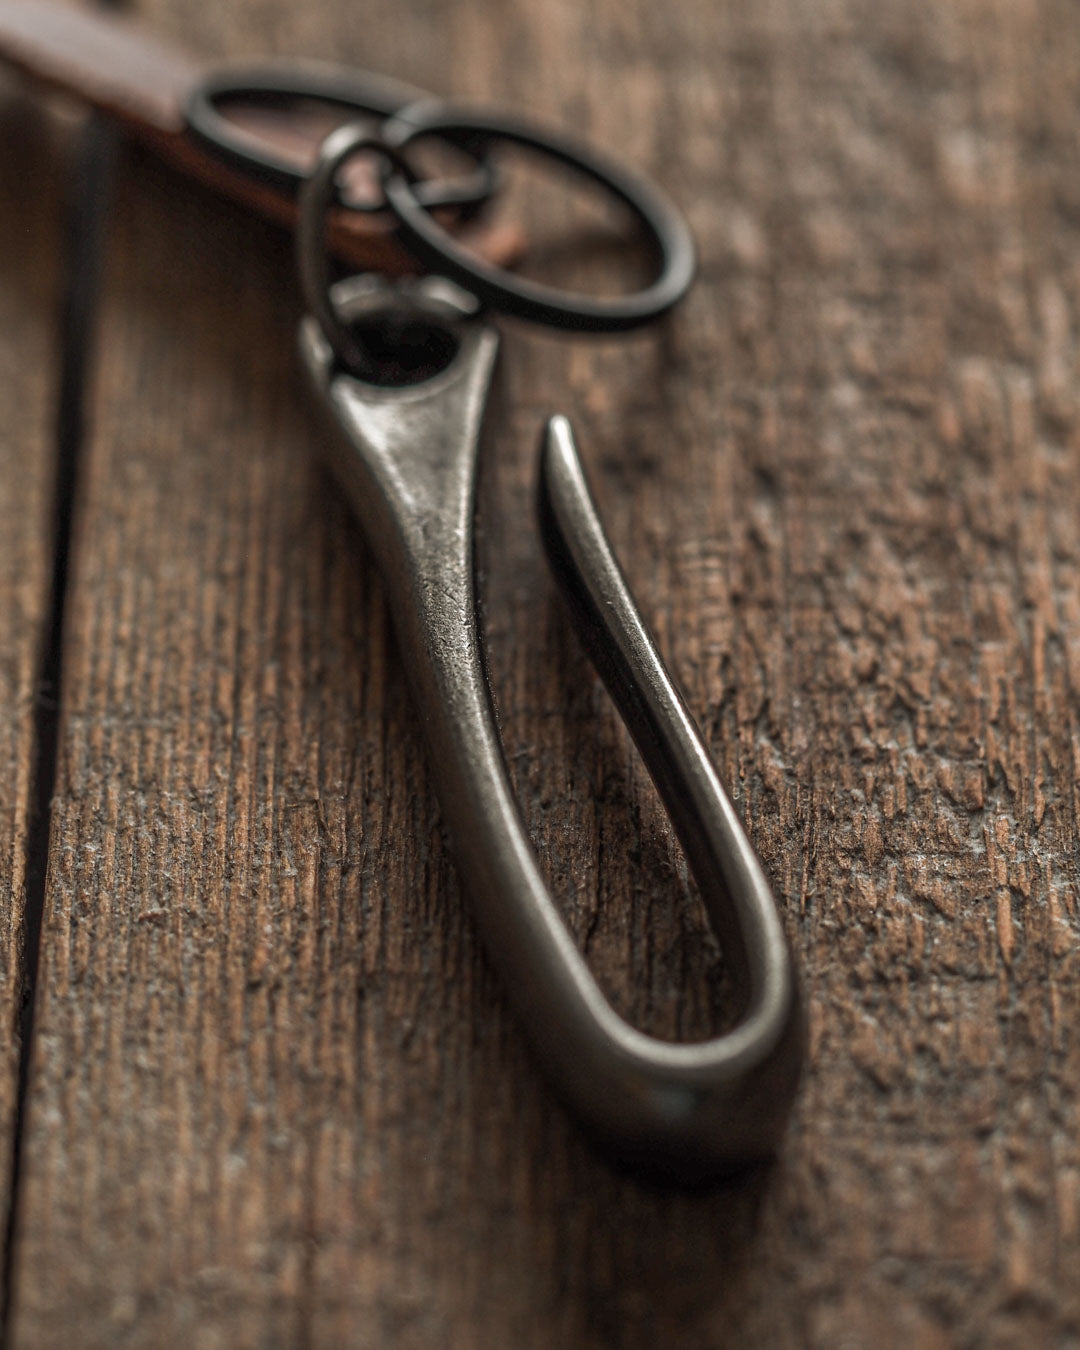 Luava handcrafted japanese key hook vegetable tanned leather tag key ring gunmetal black detail